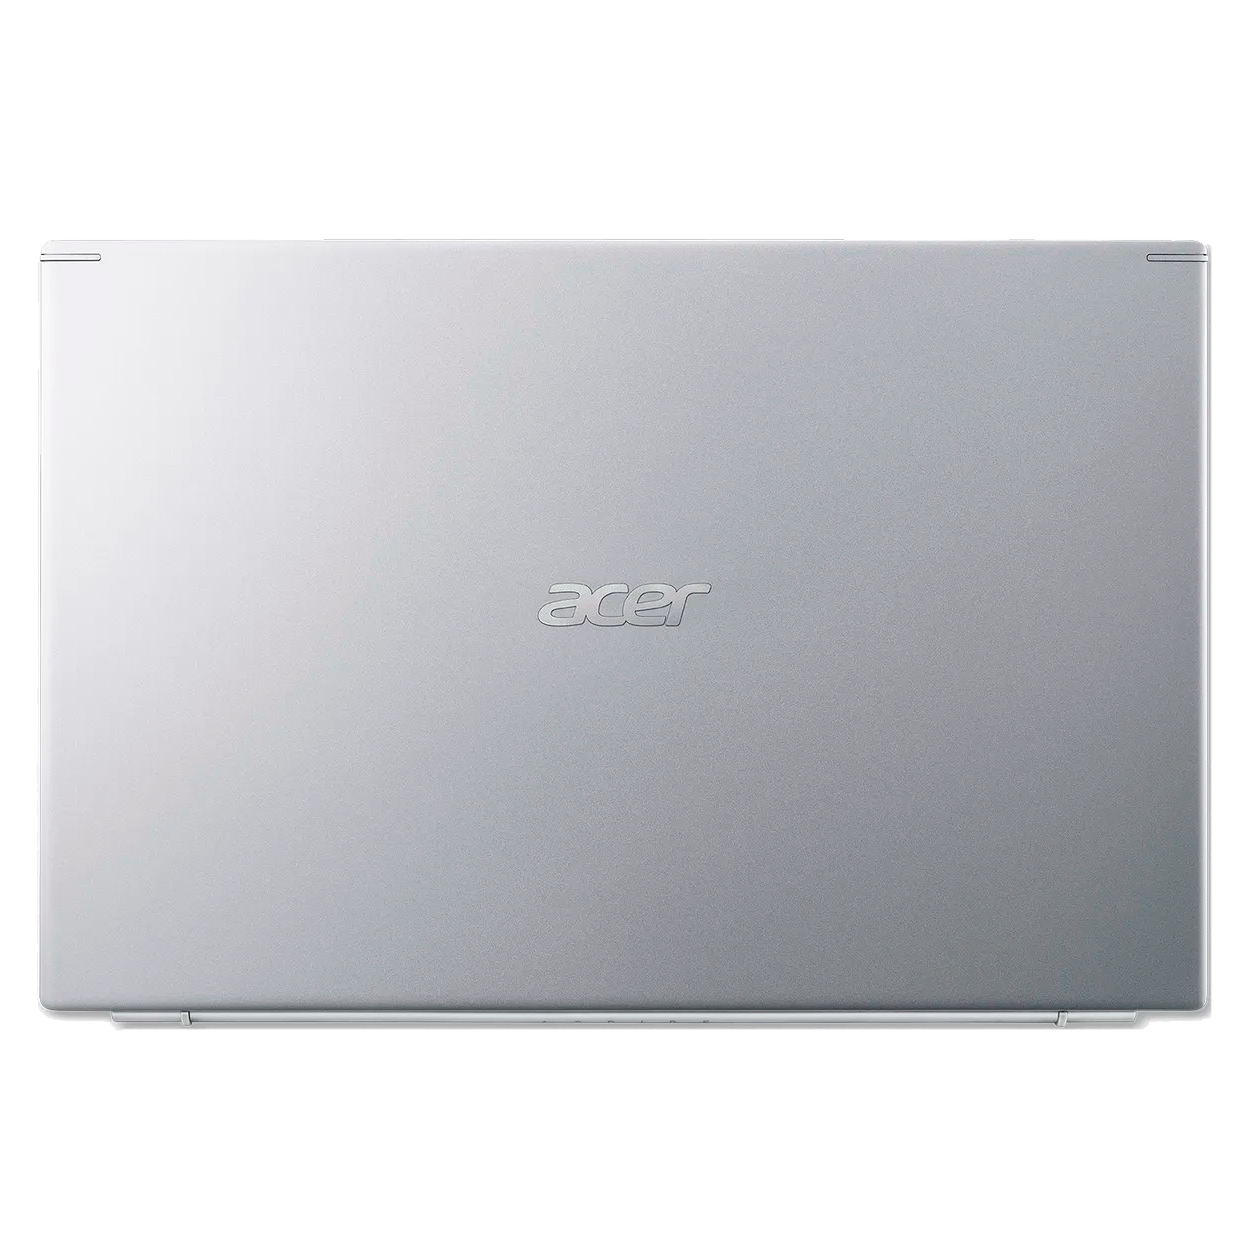 Acer Spin 3 sp314-54n. ASUS VIVOBOOK x543ba-dm624. Ноутбук Acer Aspire 3 a315-23. ASUS r565ma-br203t. Ноутбук acer aspire 3 silver